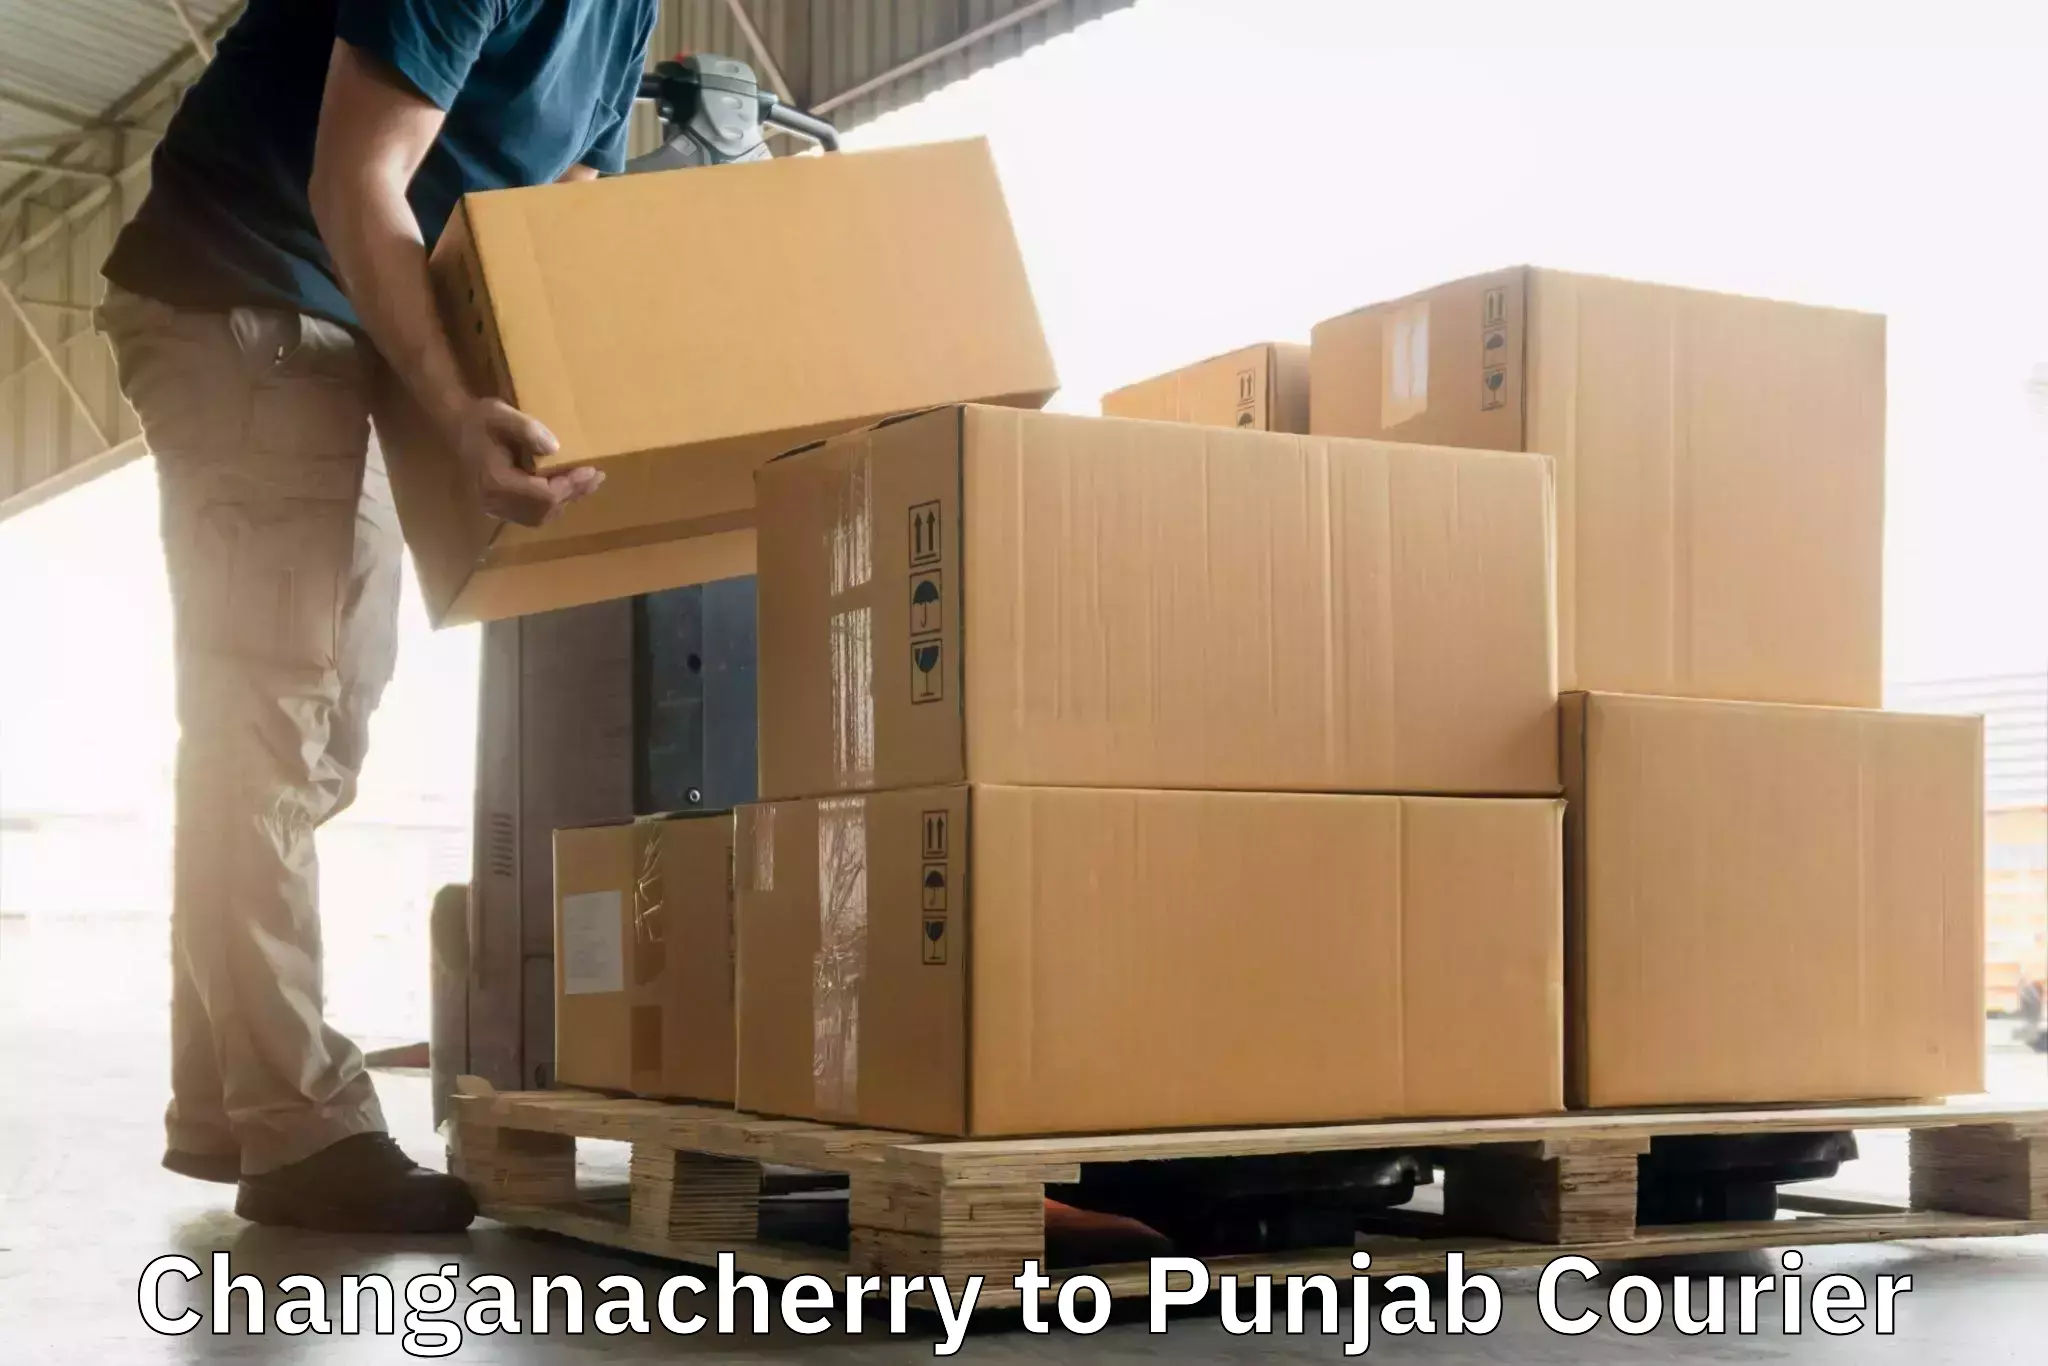 Flexible courier rates in Changanacherry to Patiala